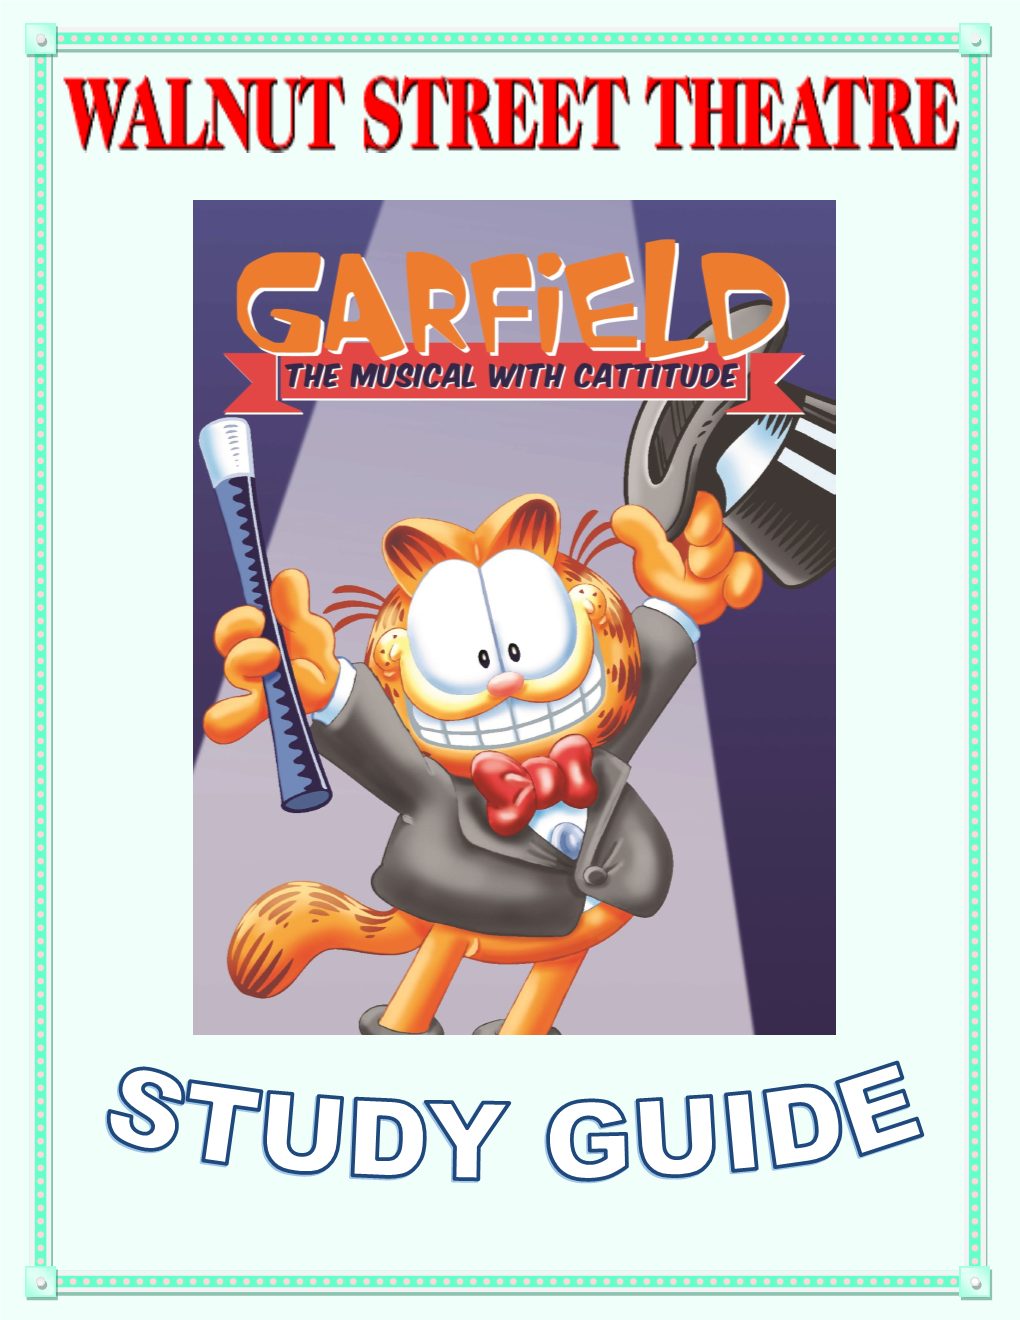 Garfield: the Musical with Cattitude